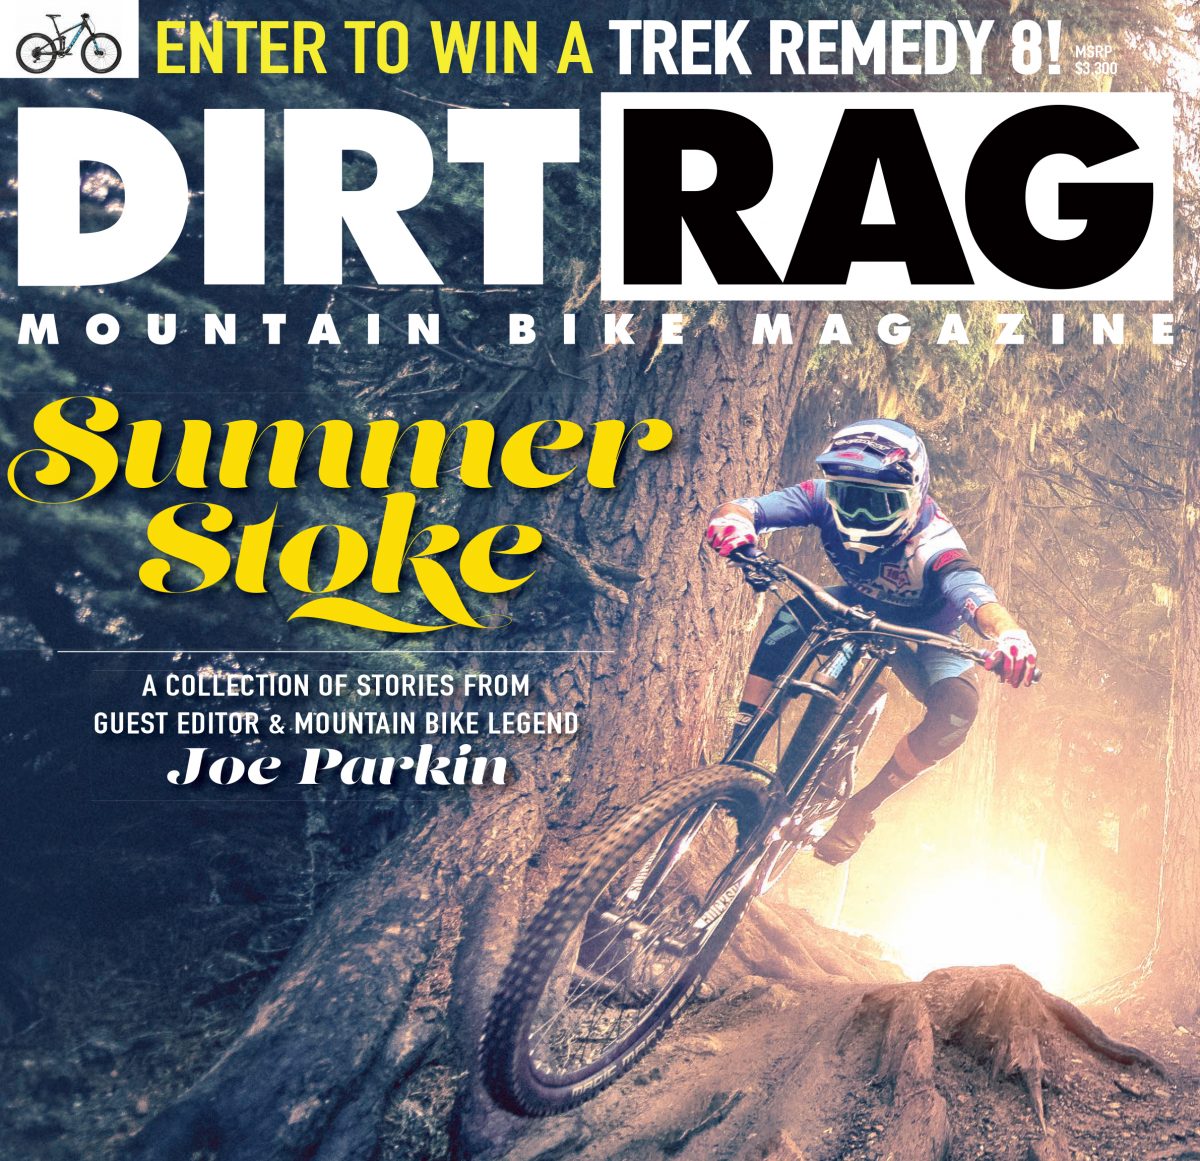 Dirt Rag issue 199 is here!